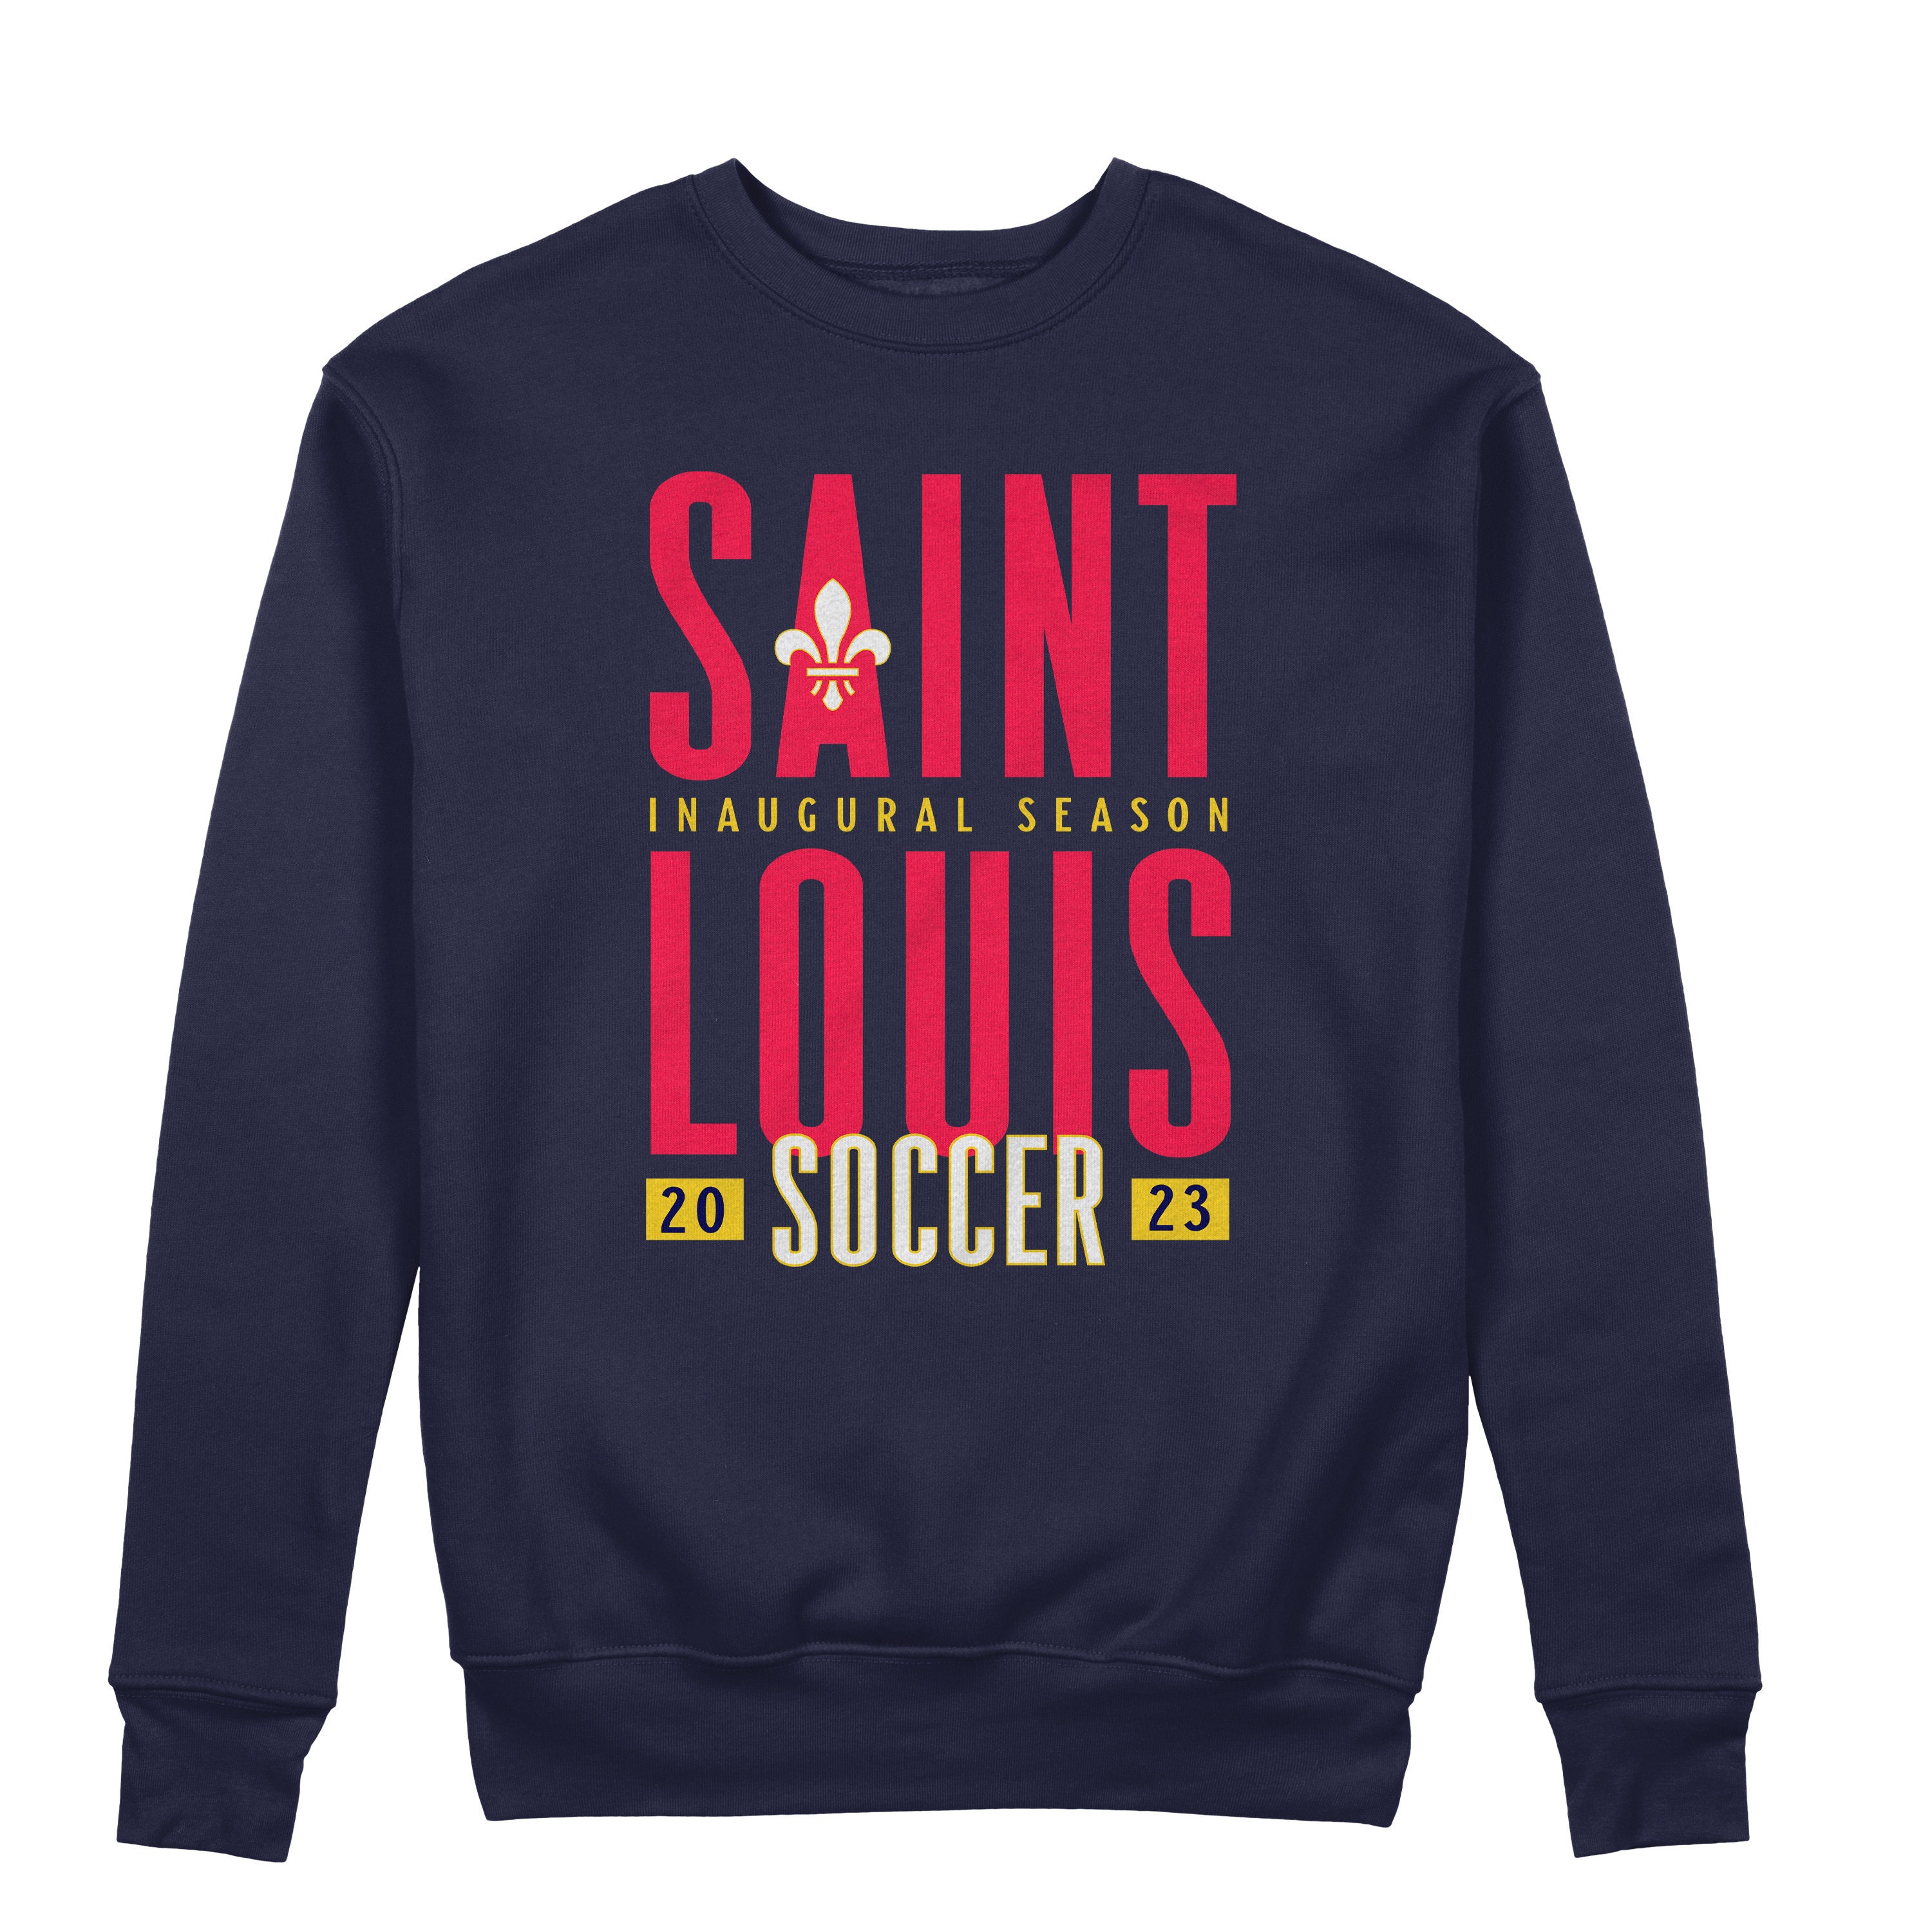 2021 St. Louligans Scarf – Saint Louligans – Supporting Soccer in the St.  Louis Area